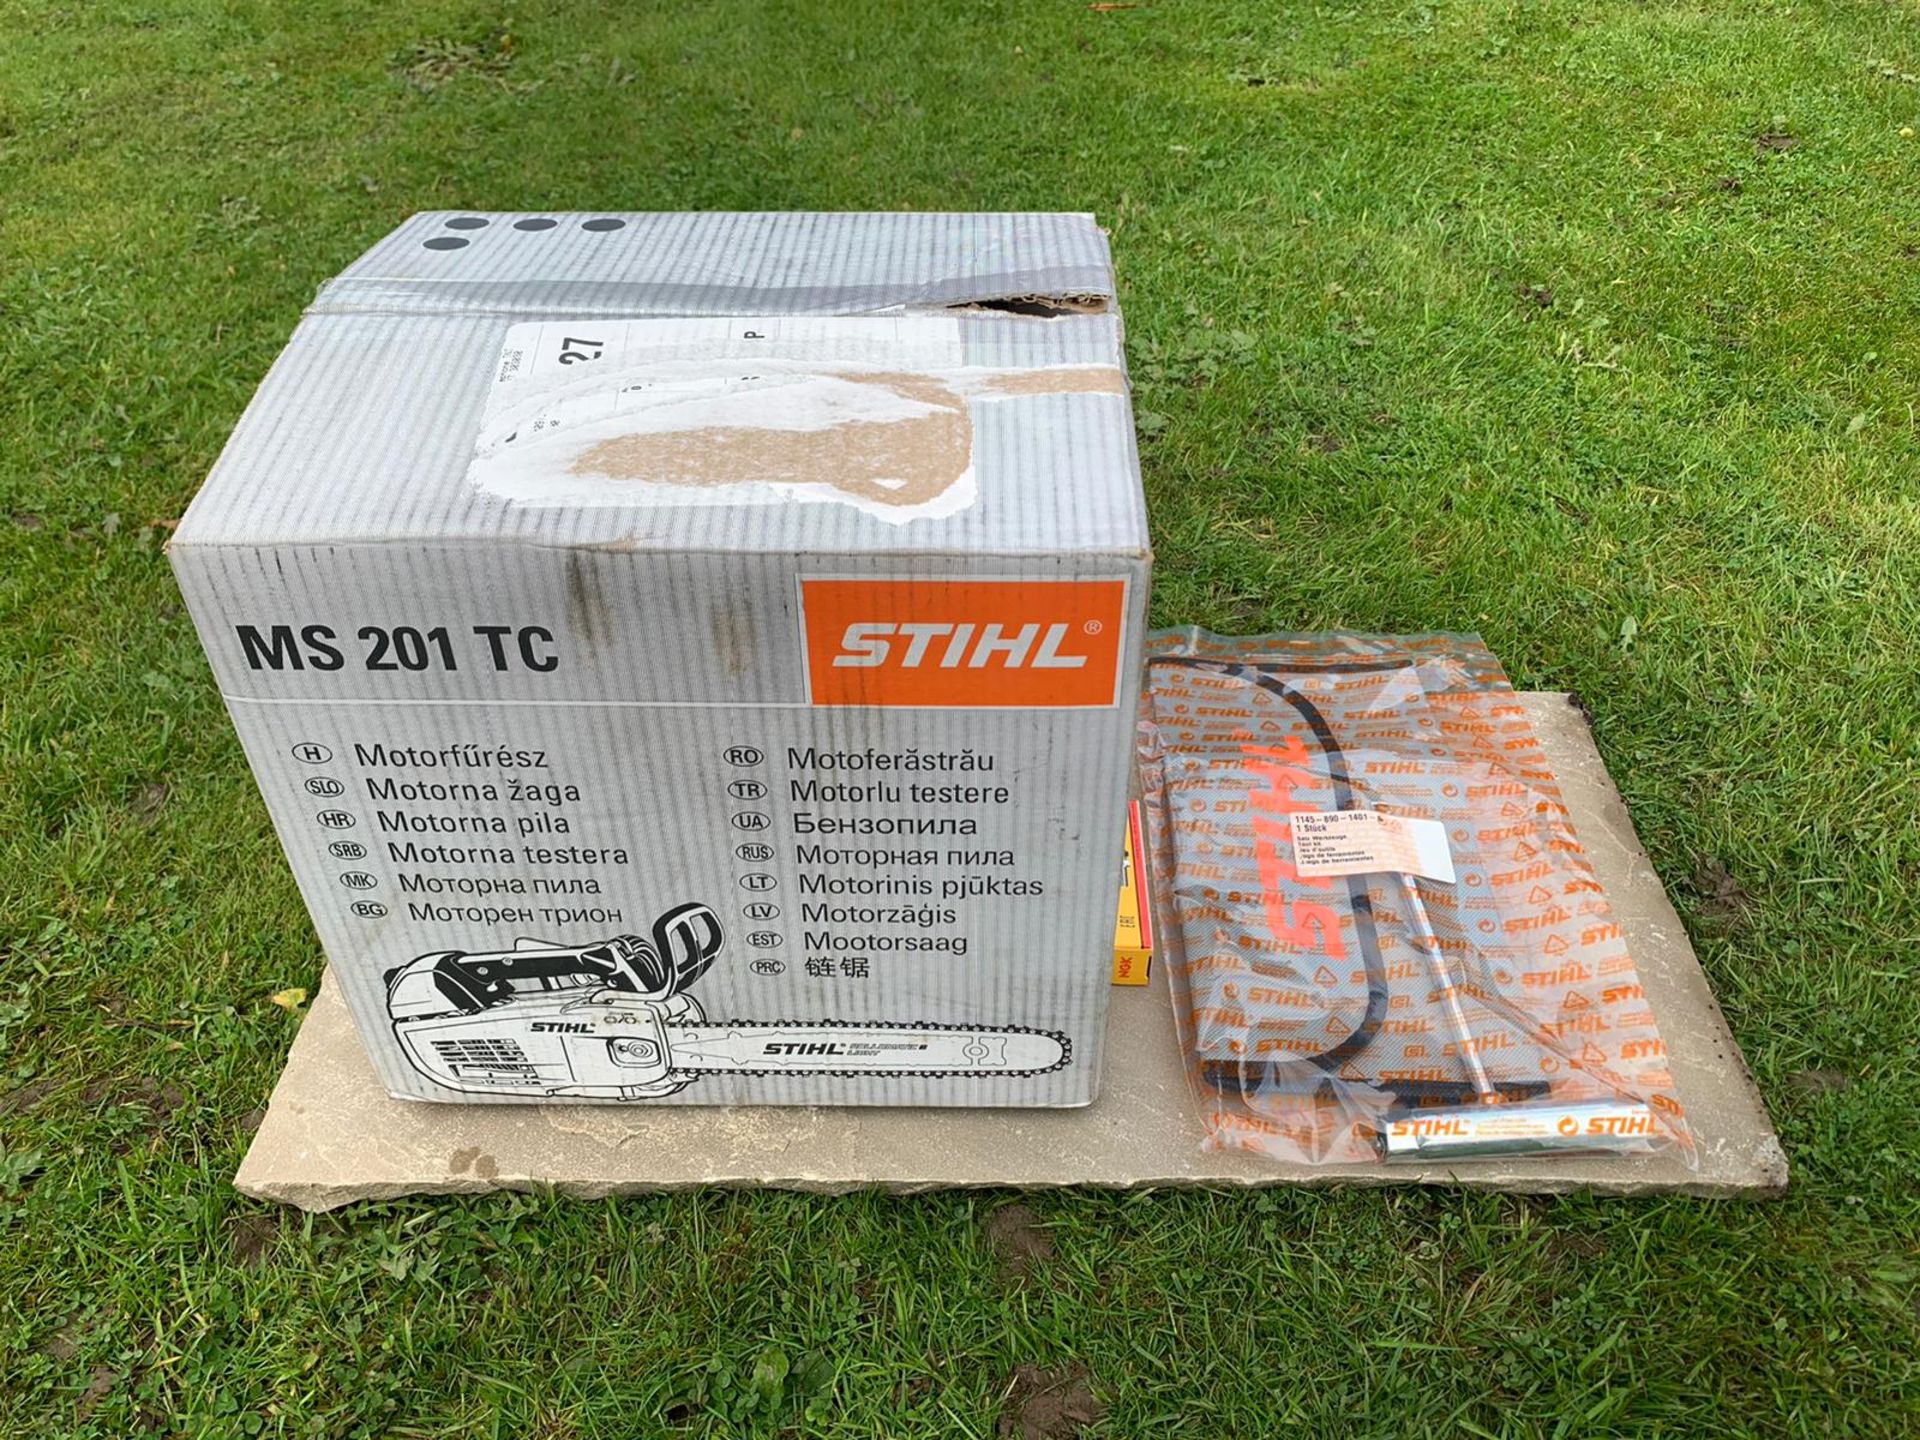 Stihl MS201TC Top Handle Saw, Runs works, ex demo condition, bought brand new this year - used twice